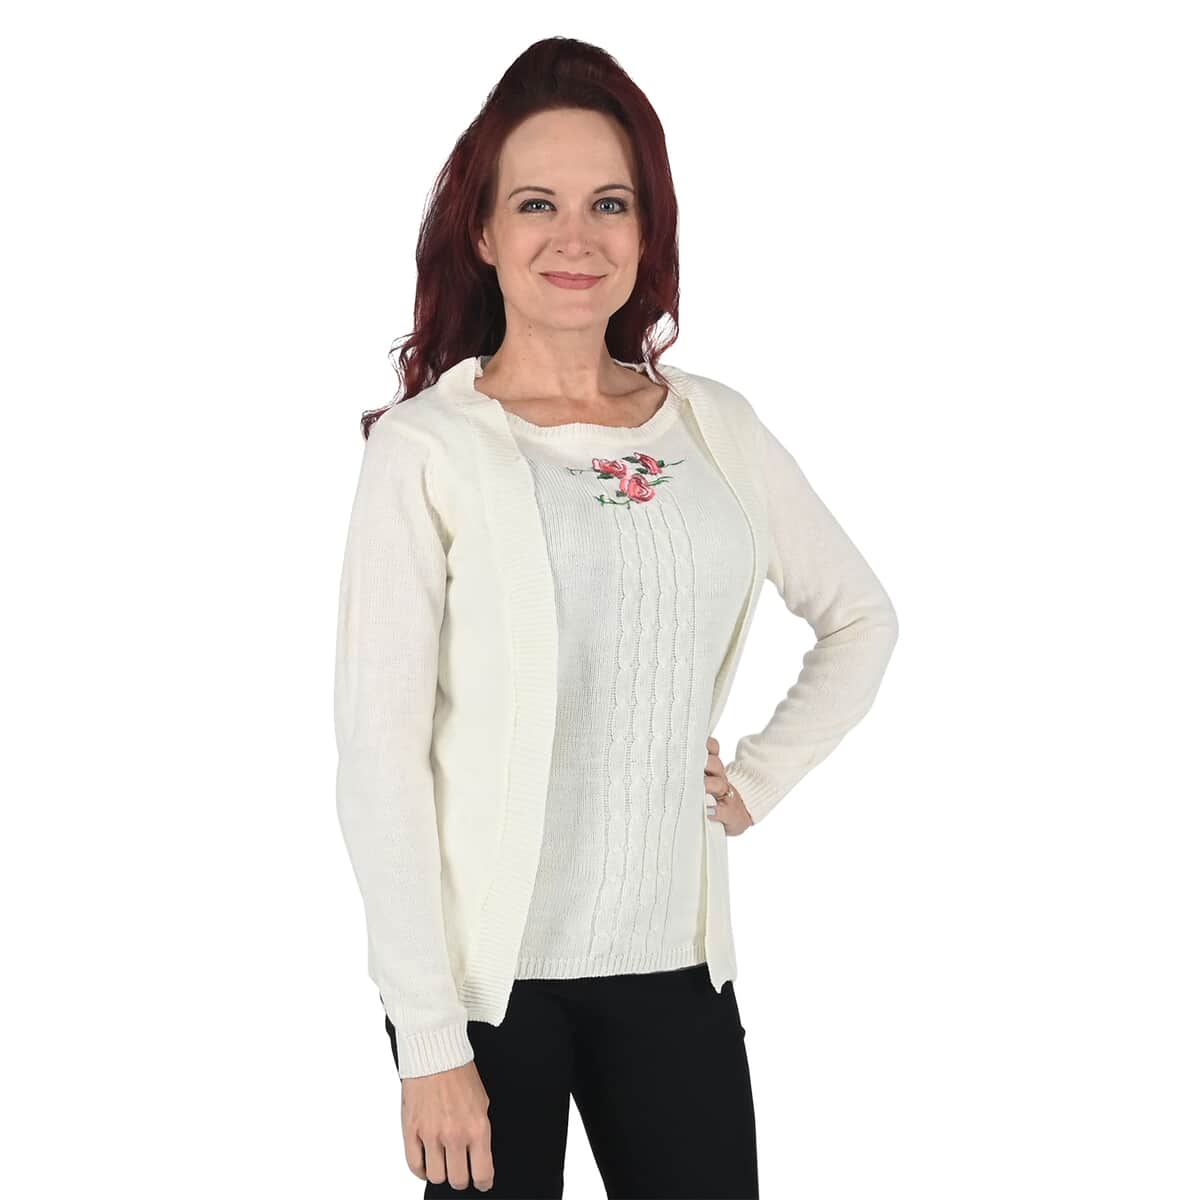 NY DESIGNER SWEATER CLOSEOUT - EVELYN TAYLOR Mock 2-in-1 Twin Set Sweater in Ivory - Size XL image number 0